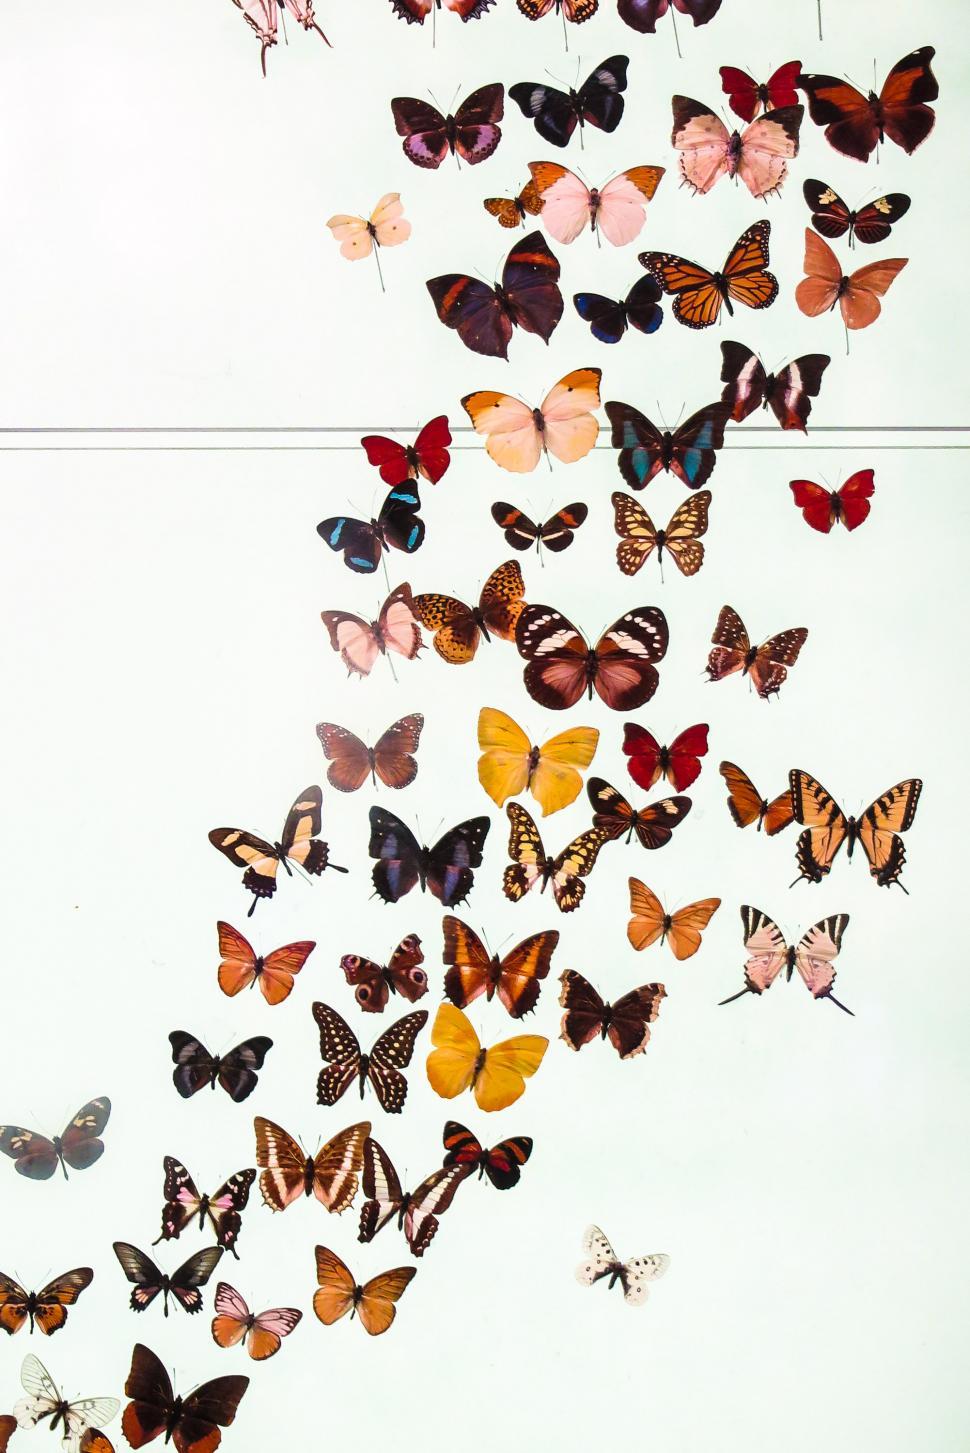 Free Stock Photo of Colorful butterfly exhibit | Download Free Images ...